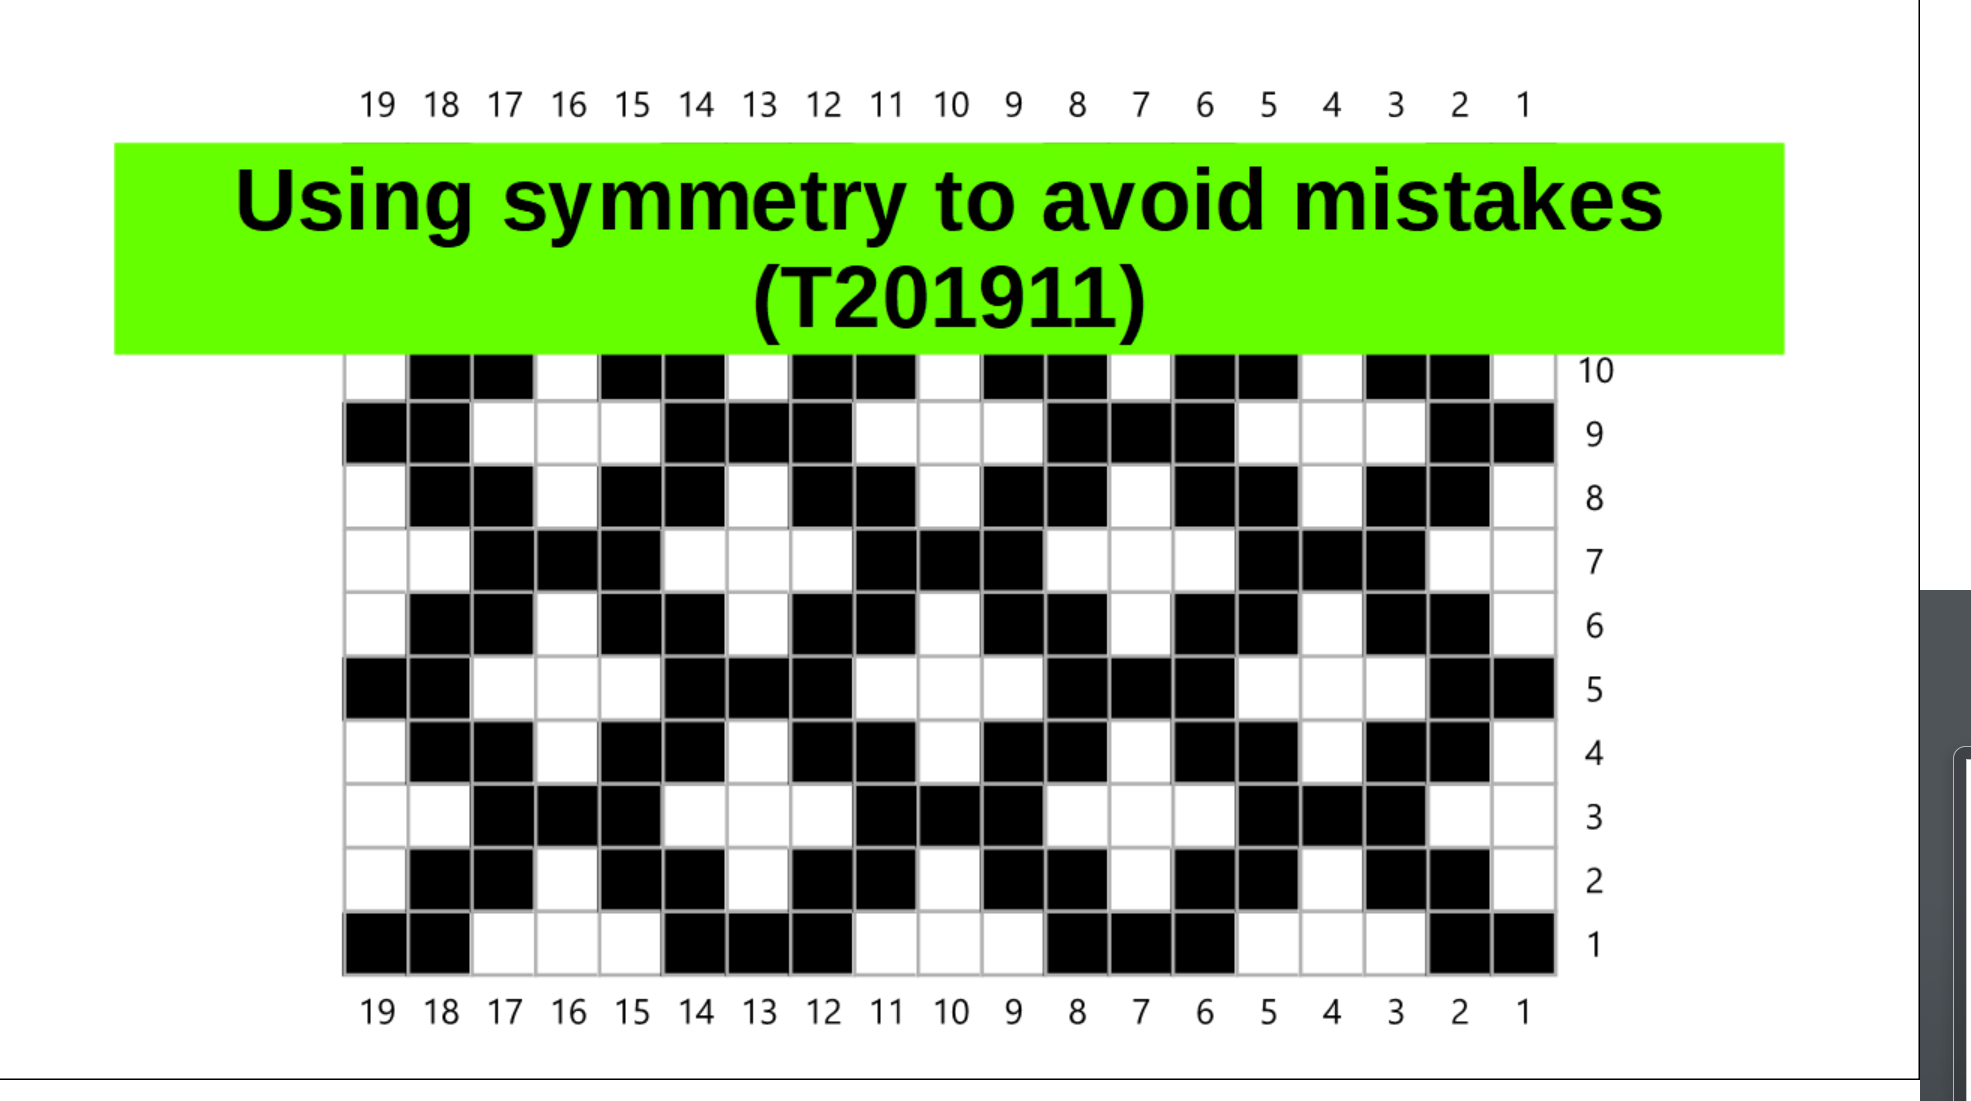 Knitting chart showing a symmetrical pattern with the video title superimposed.